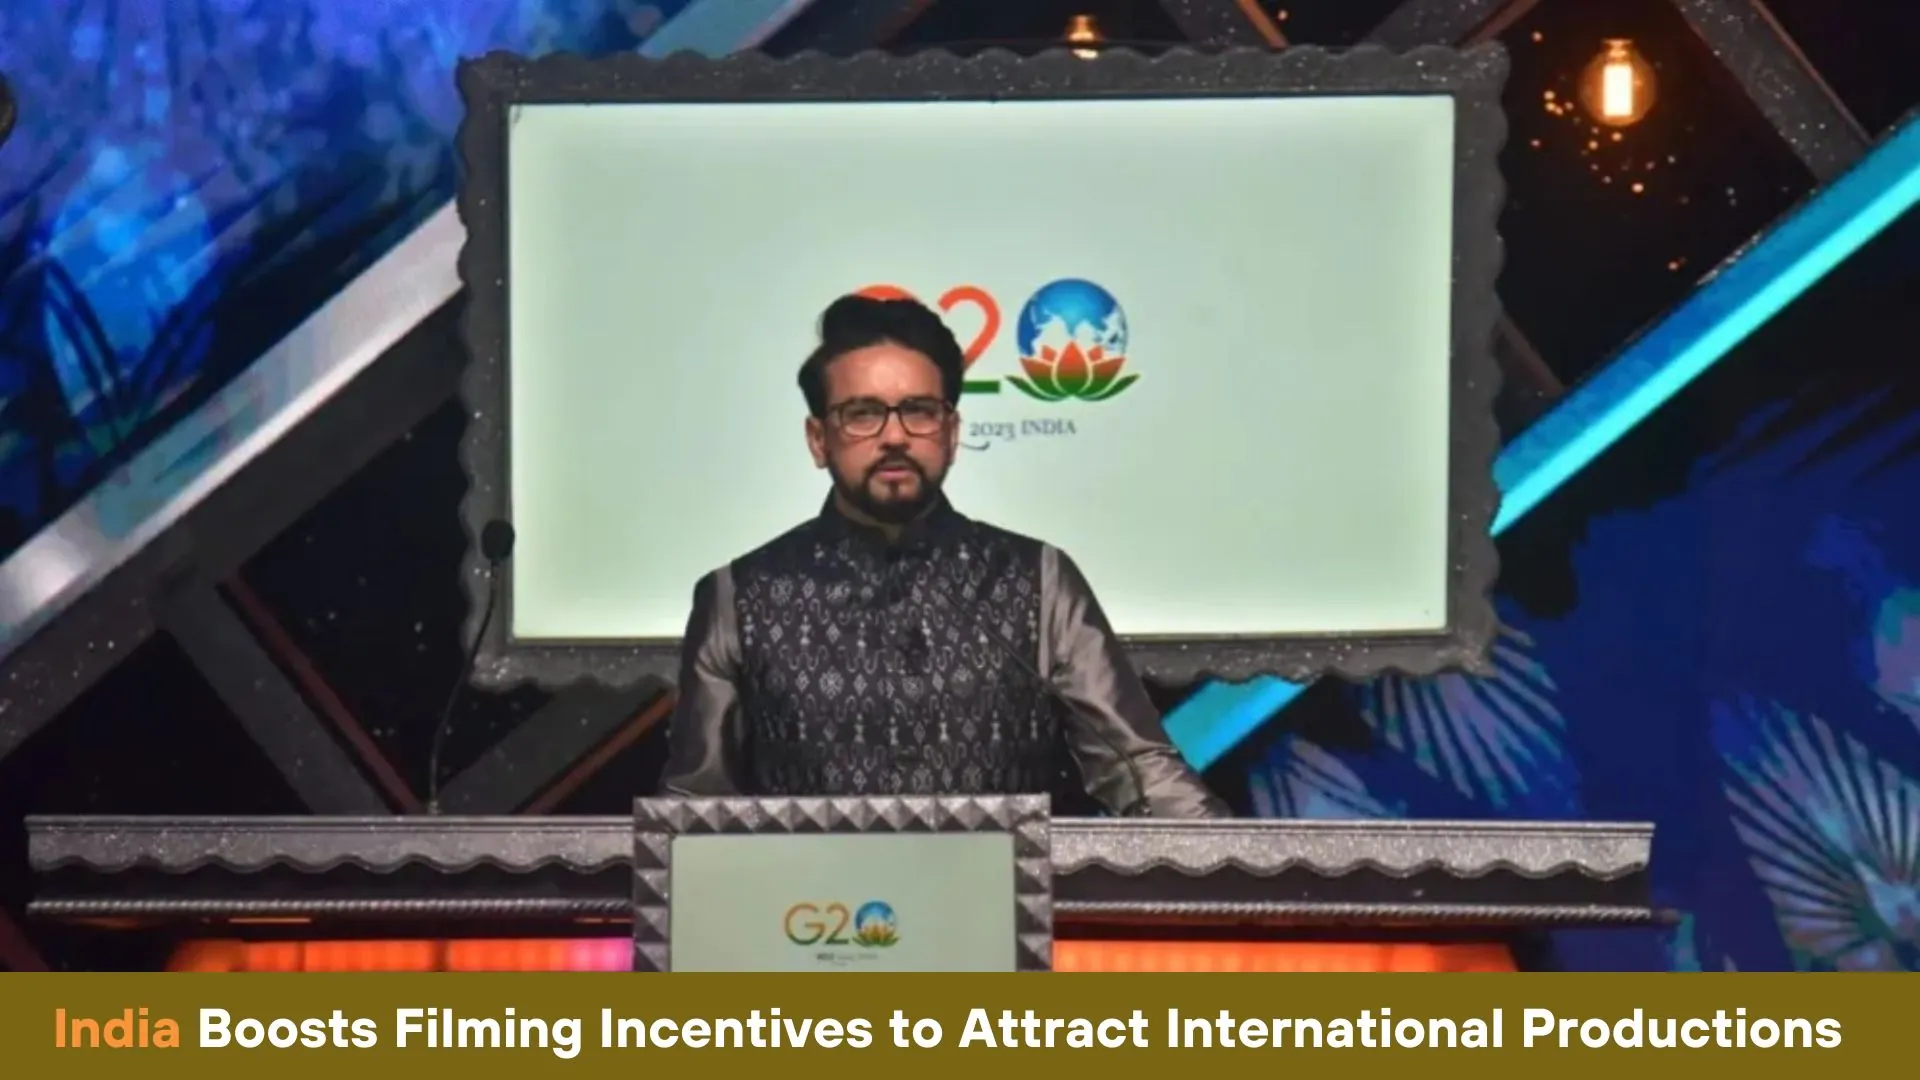 India Boosts Filming Incentives to Attract International Productions